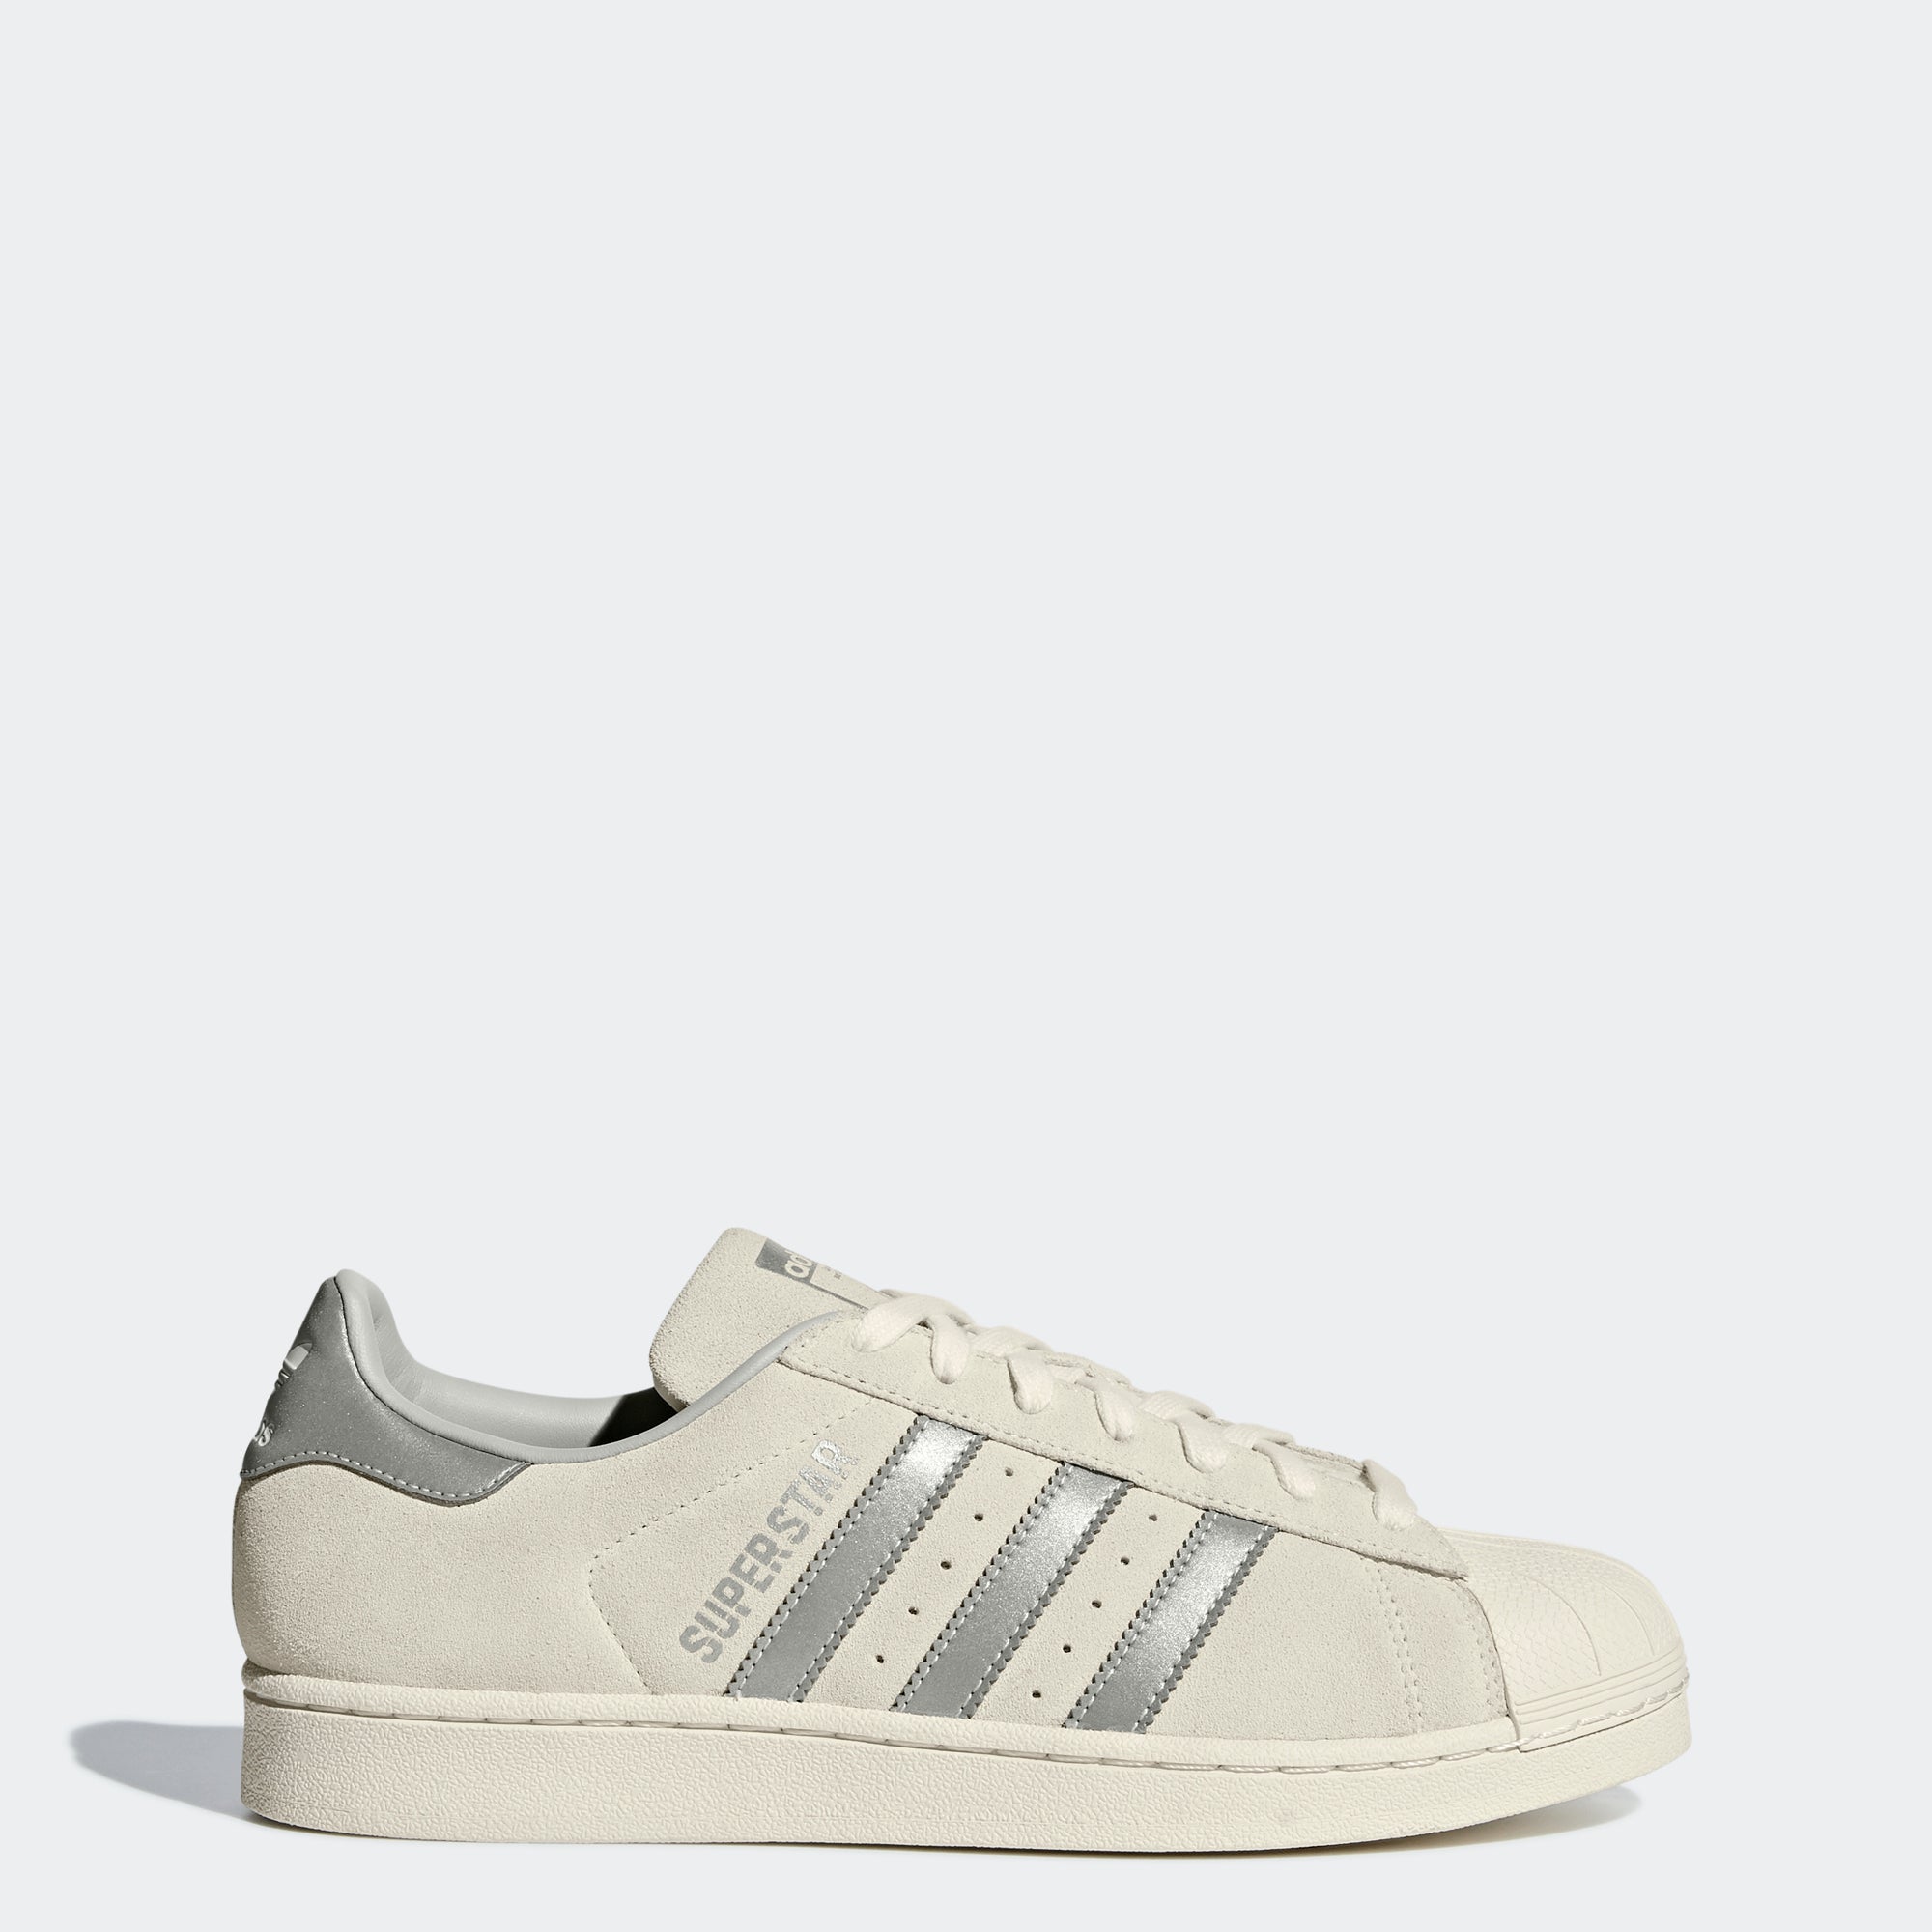 adidas Superstar Shoes Off White B41989 